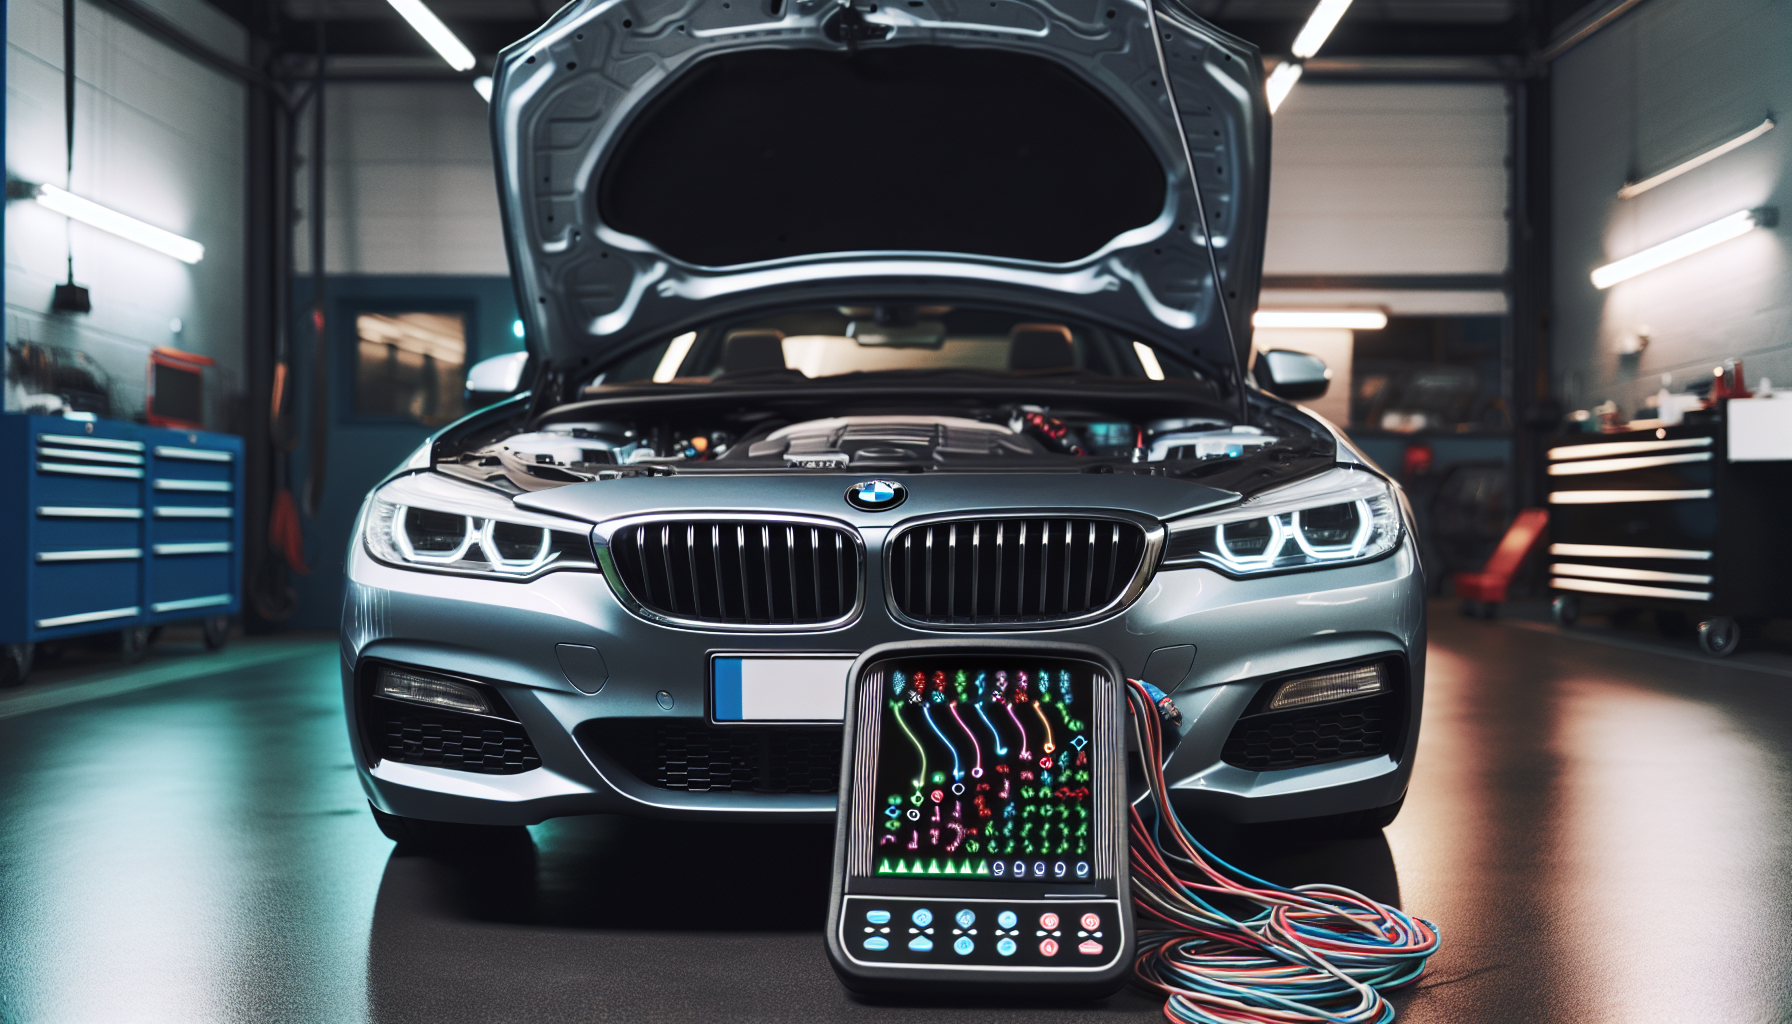 A diagnostic tool being used on a BMW engine